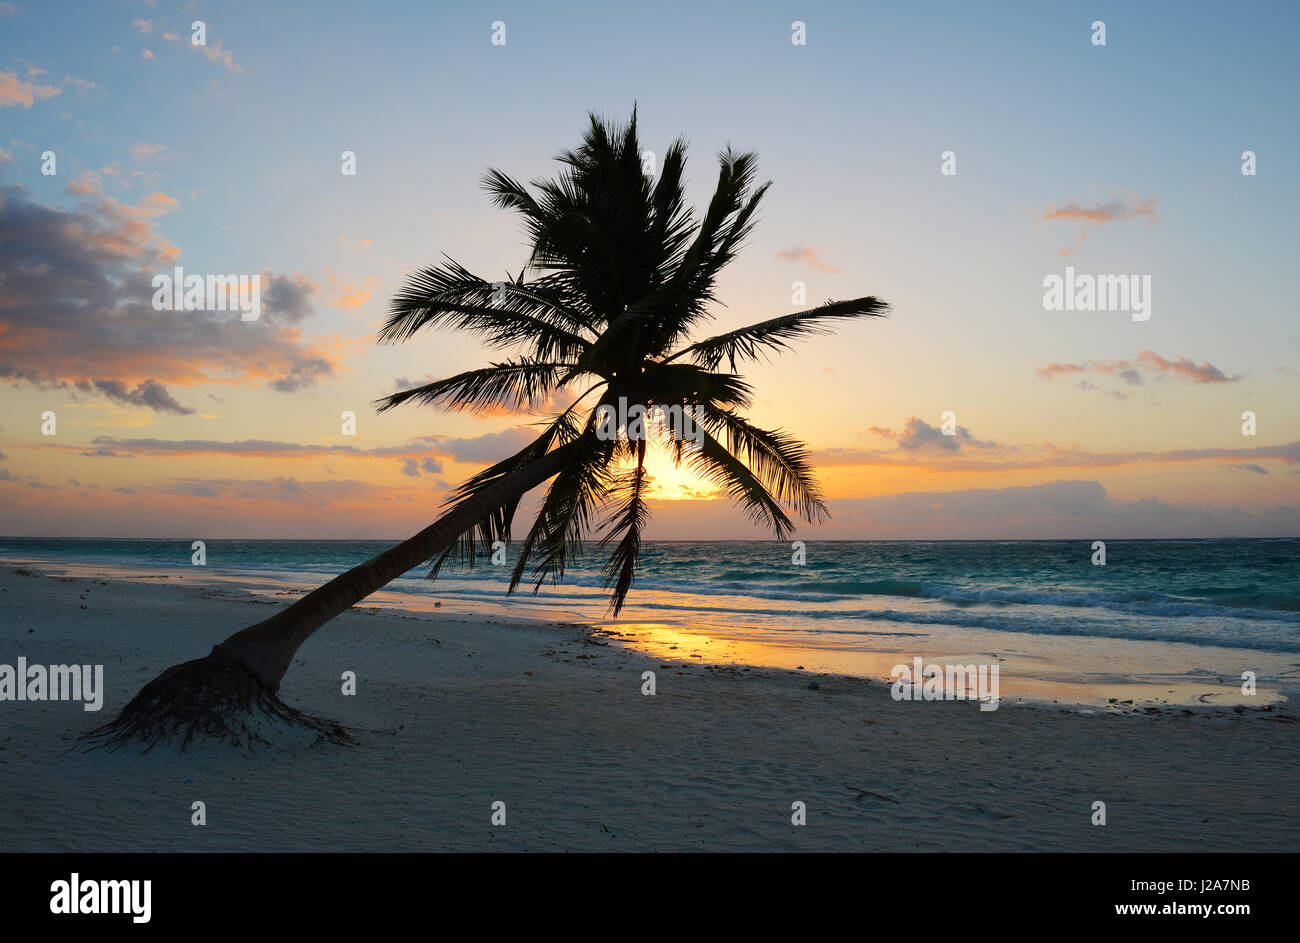 A magic sunrise with the silhouette of a palm tree along the beach of Tulum by the Caribbean sea, Mexico. Stock Photo